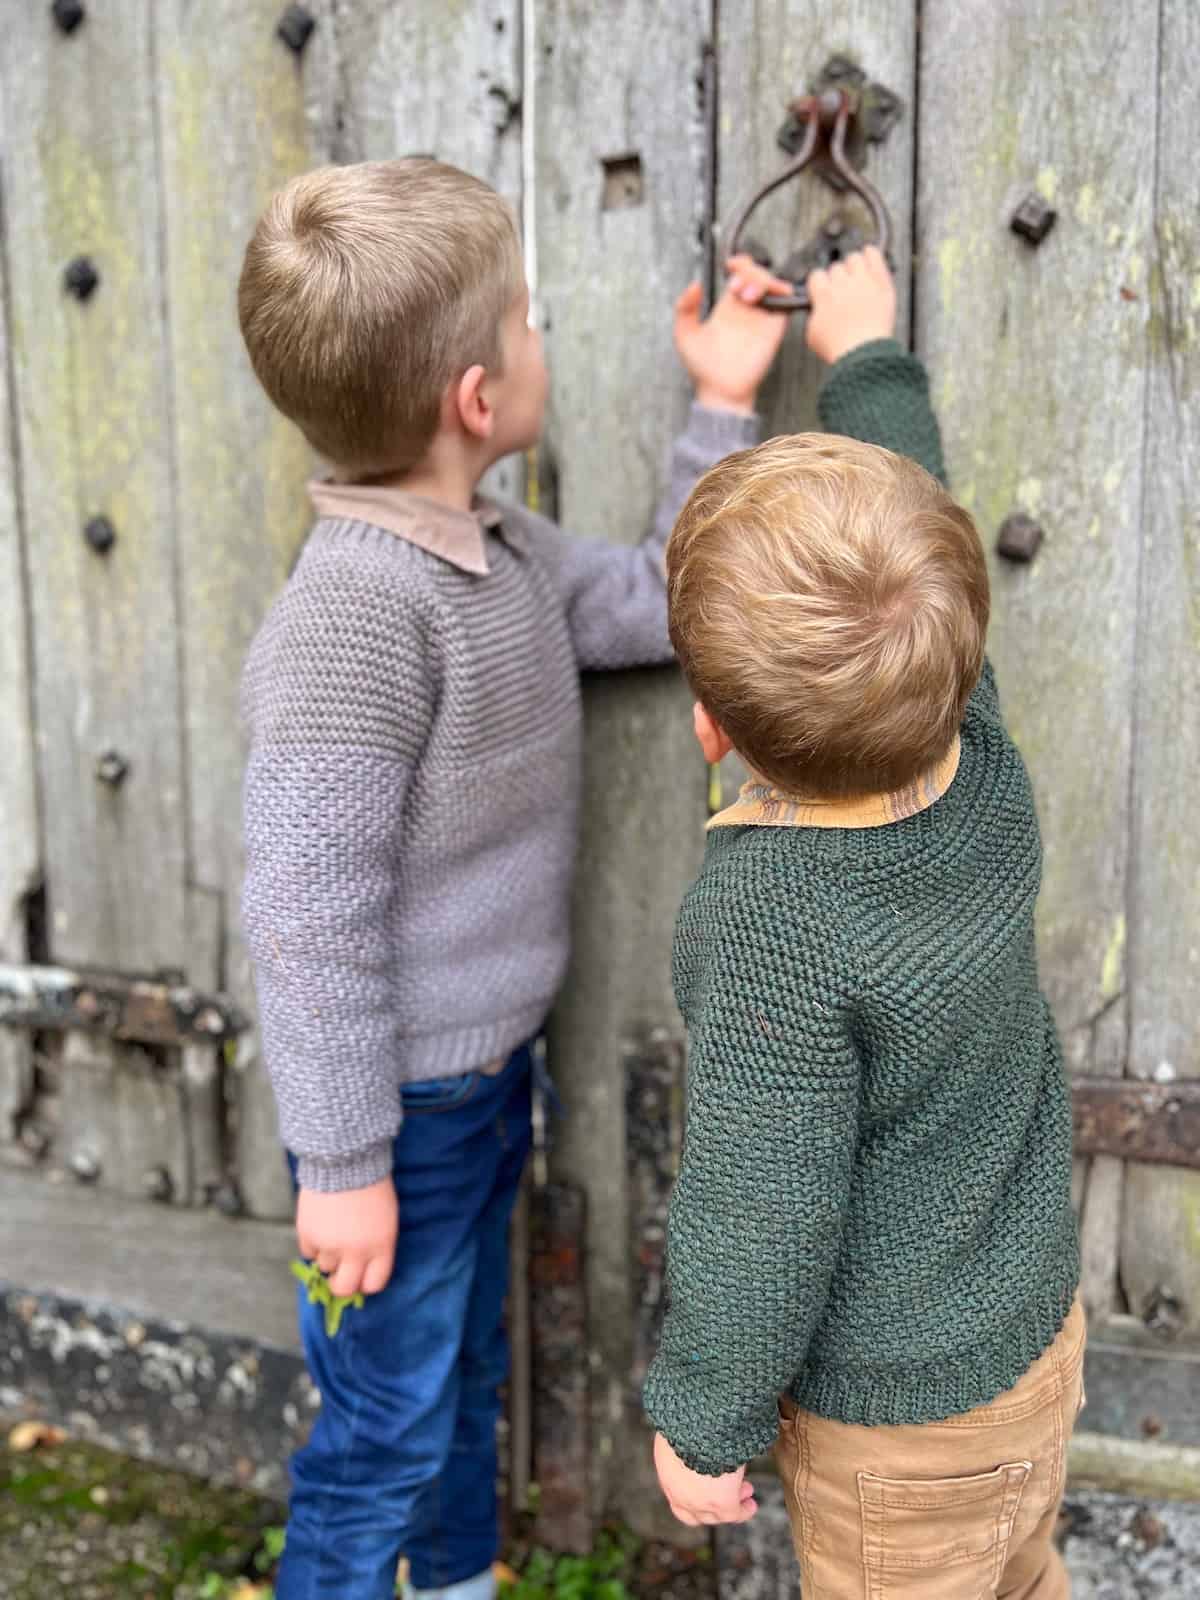 Two boys in seamless crochet sweaters holding onto old door handle.